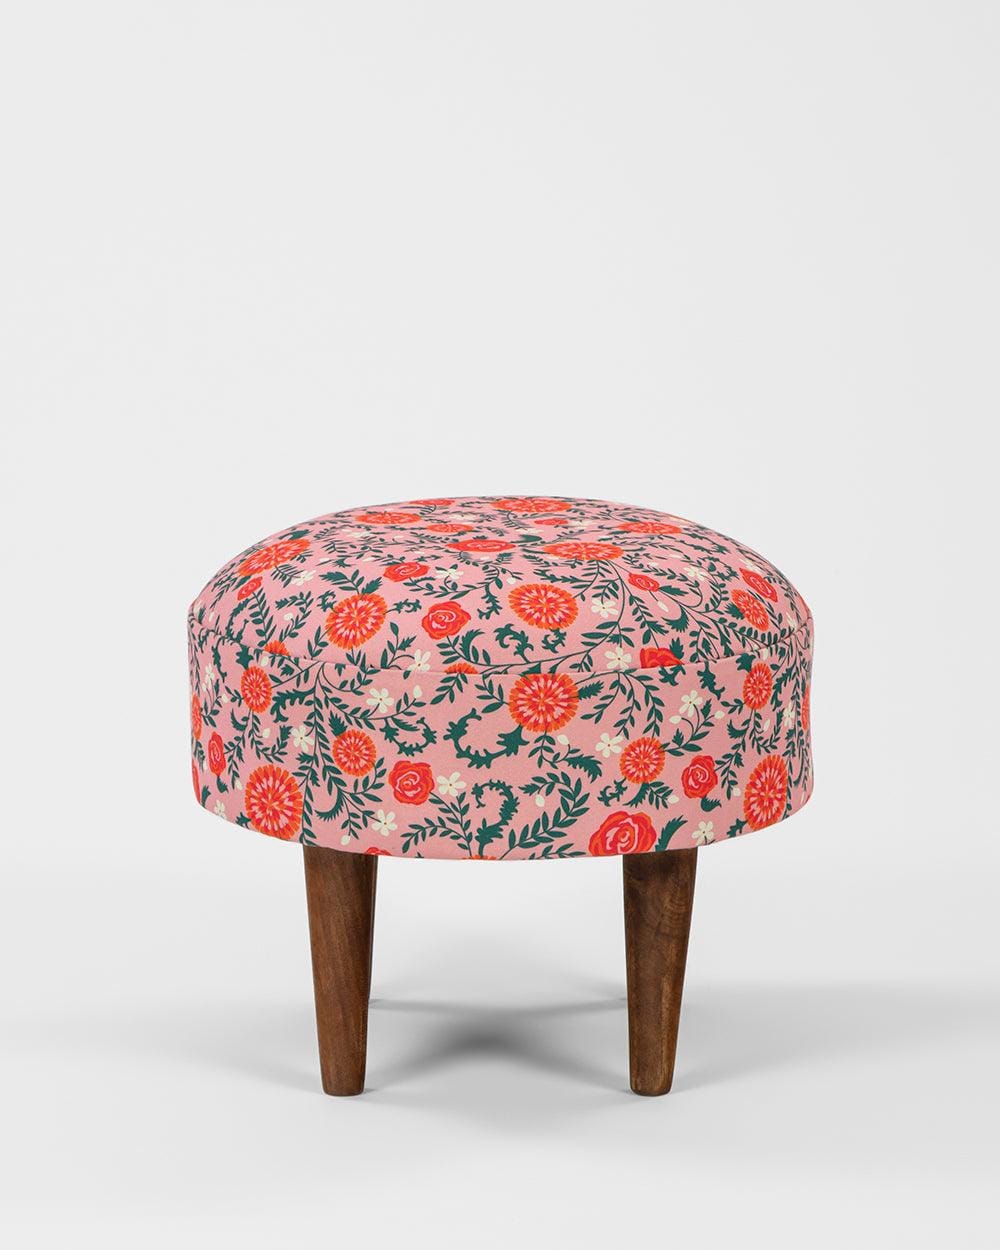 Chumbak Begum Foot Rest - Earthy Floral